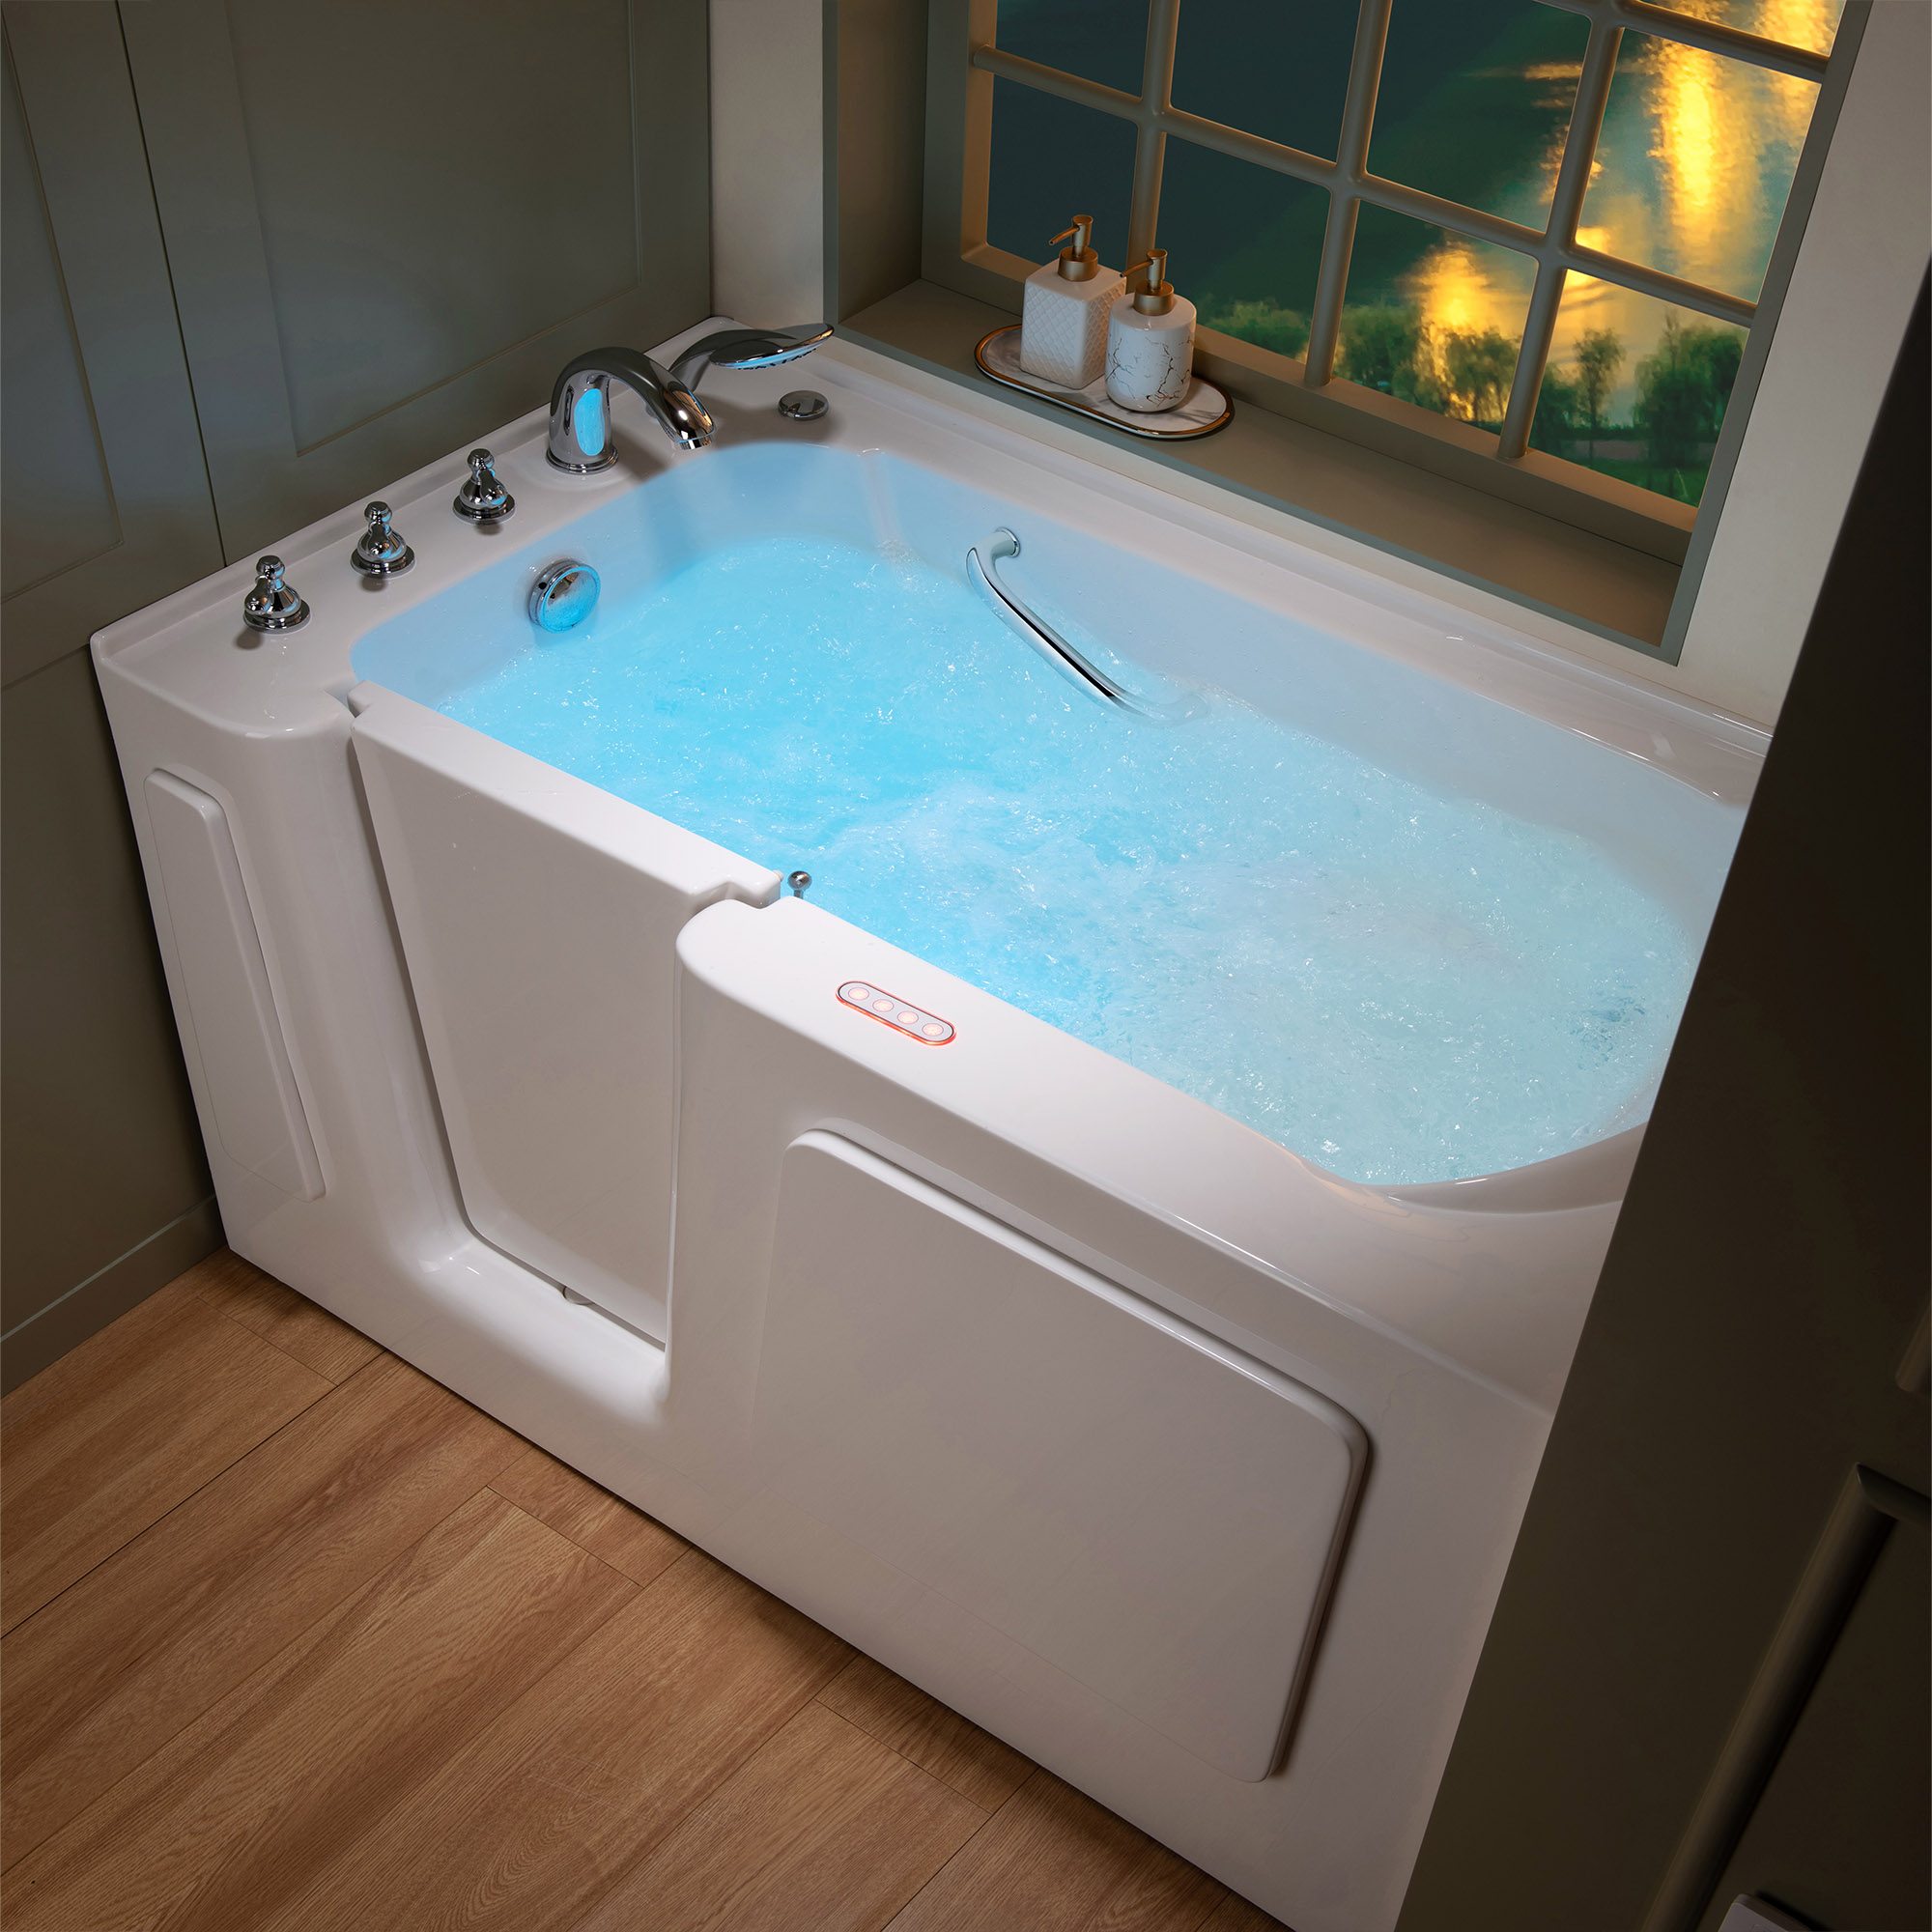  WOODBRIDGE 60 in. x 30 in. Left Hand Walk-In Air & Whirlpool Jets Hot Tub With Quick Fill Faucet with Hand Shower, White High Glass Acrylic Tub with Computer Control Panel, WB603038L_11548